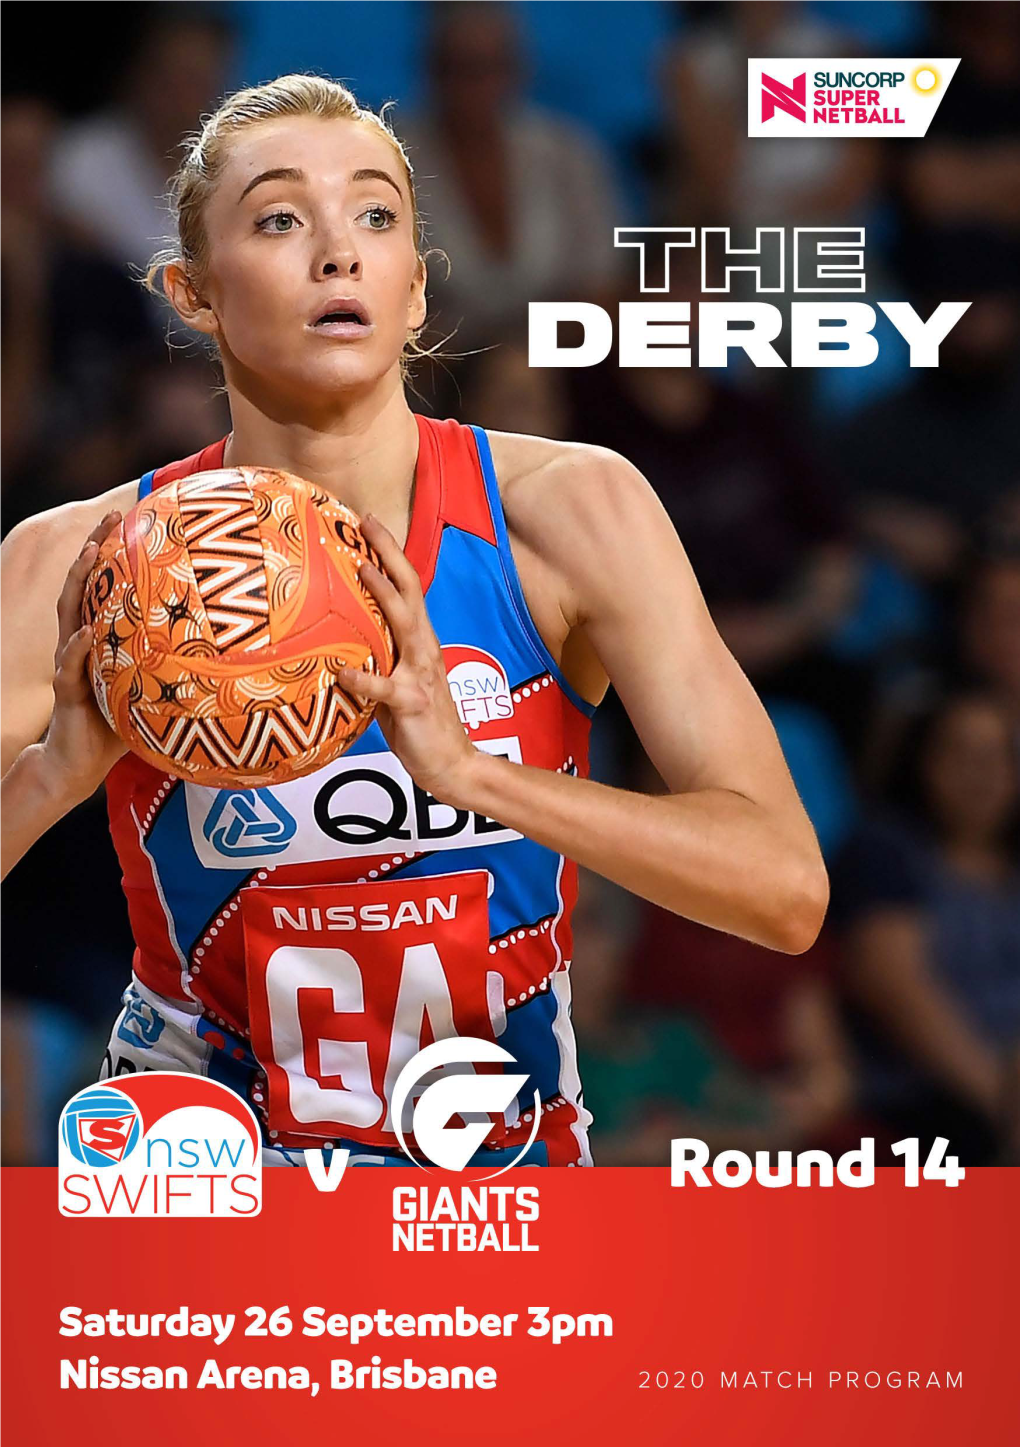 GIANTS Netball Captain's LIVE on Saturday at 3:00PM AEST on Column Channel 9 Or the Netball Live App